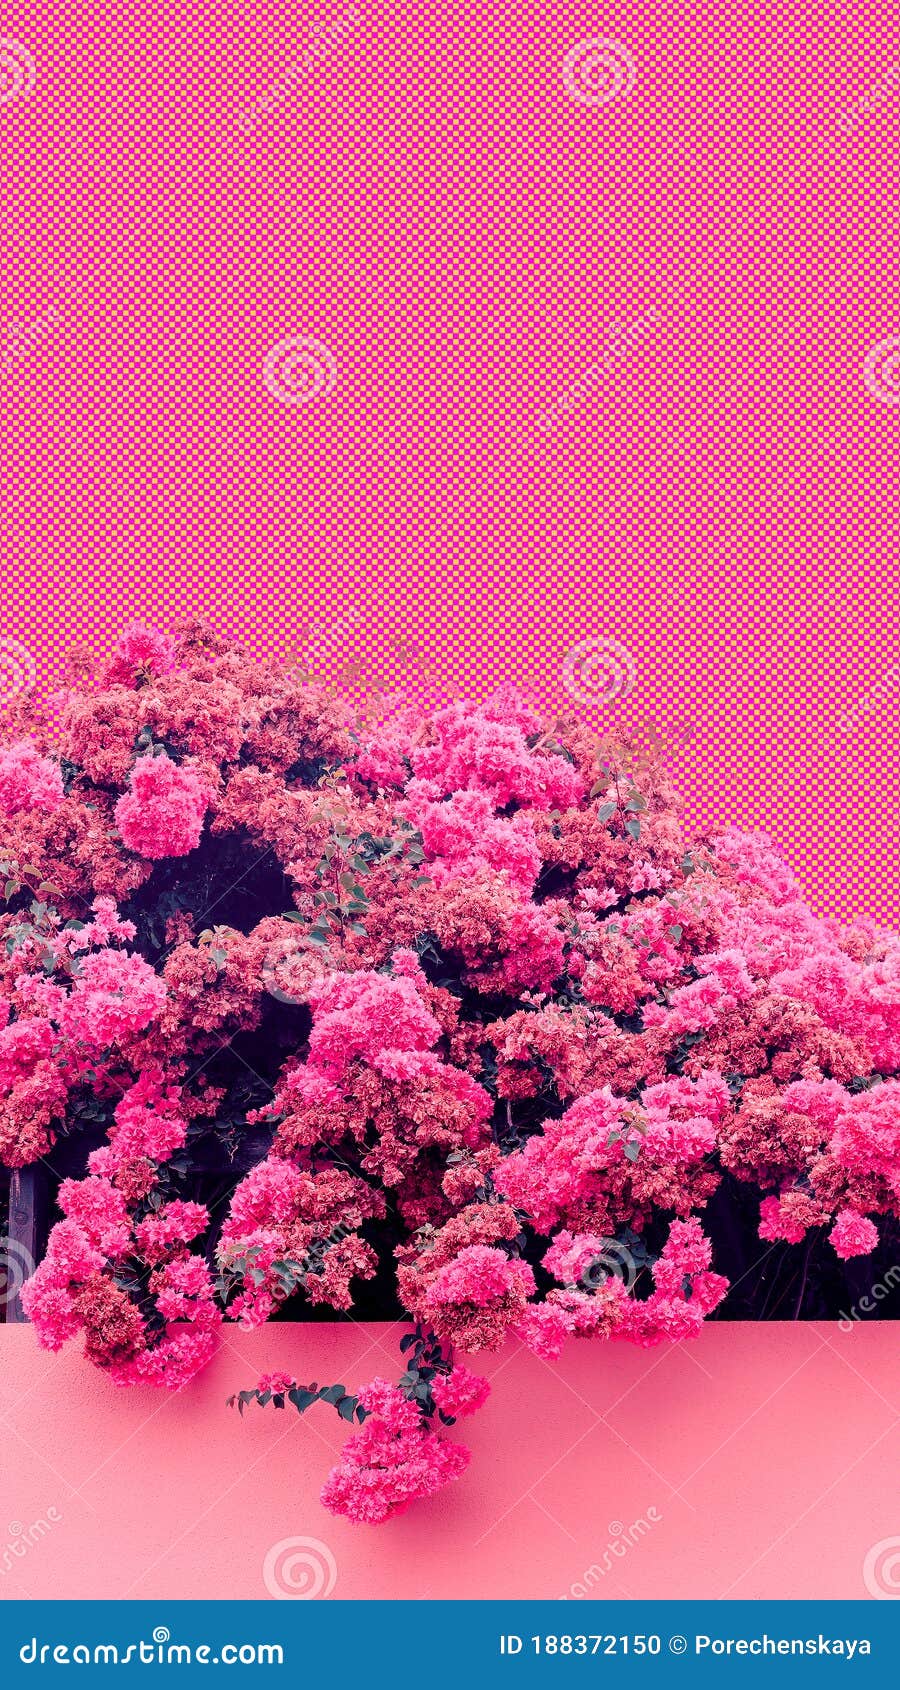 Aesthetic Collage Wallpaper. Pink Blooming Flowers. Spring Coming Stock  Photo - Image of landscape, tropic: 188372150